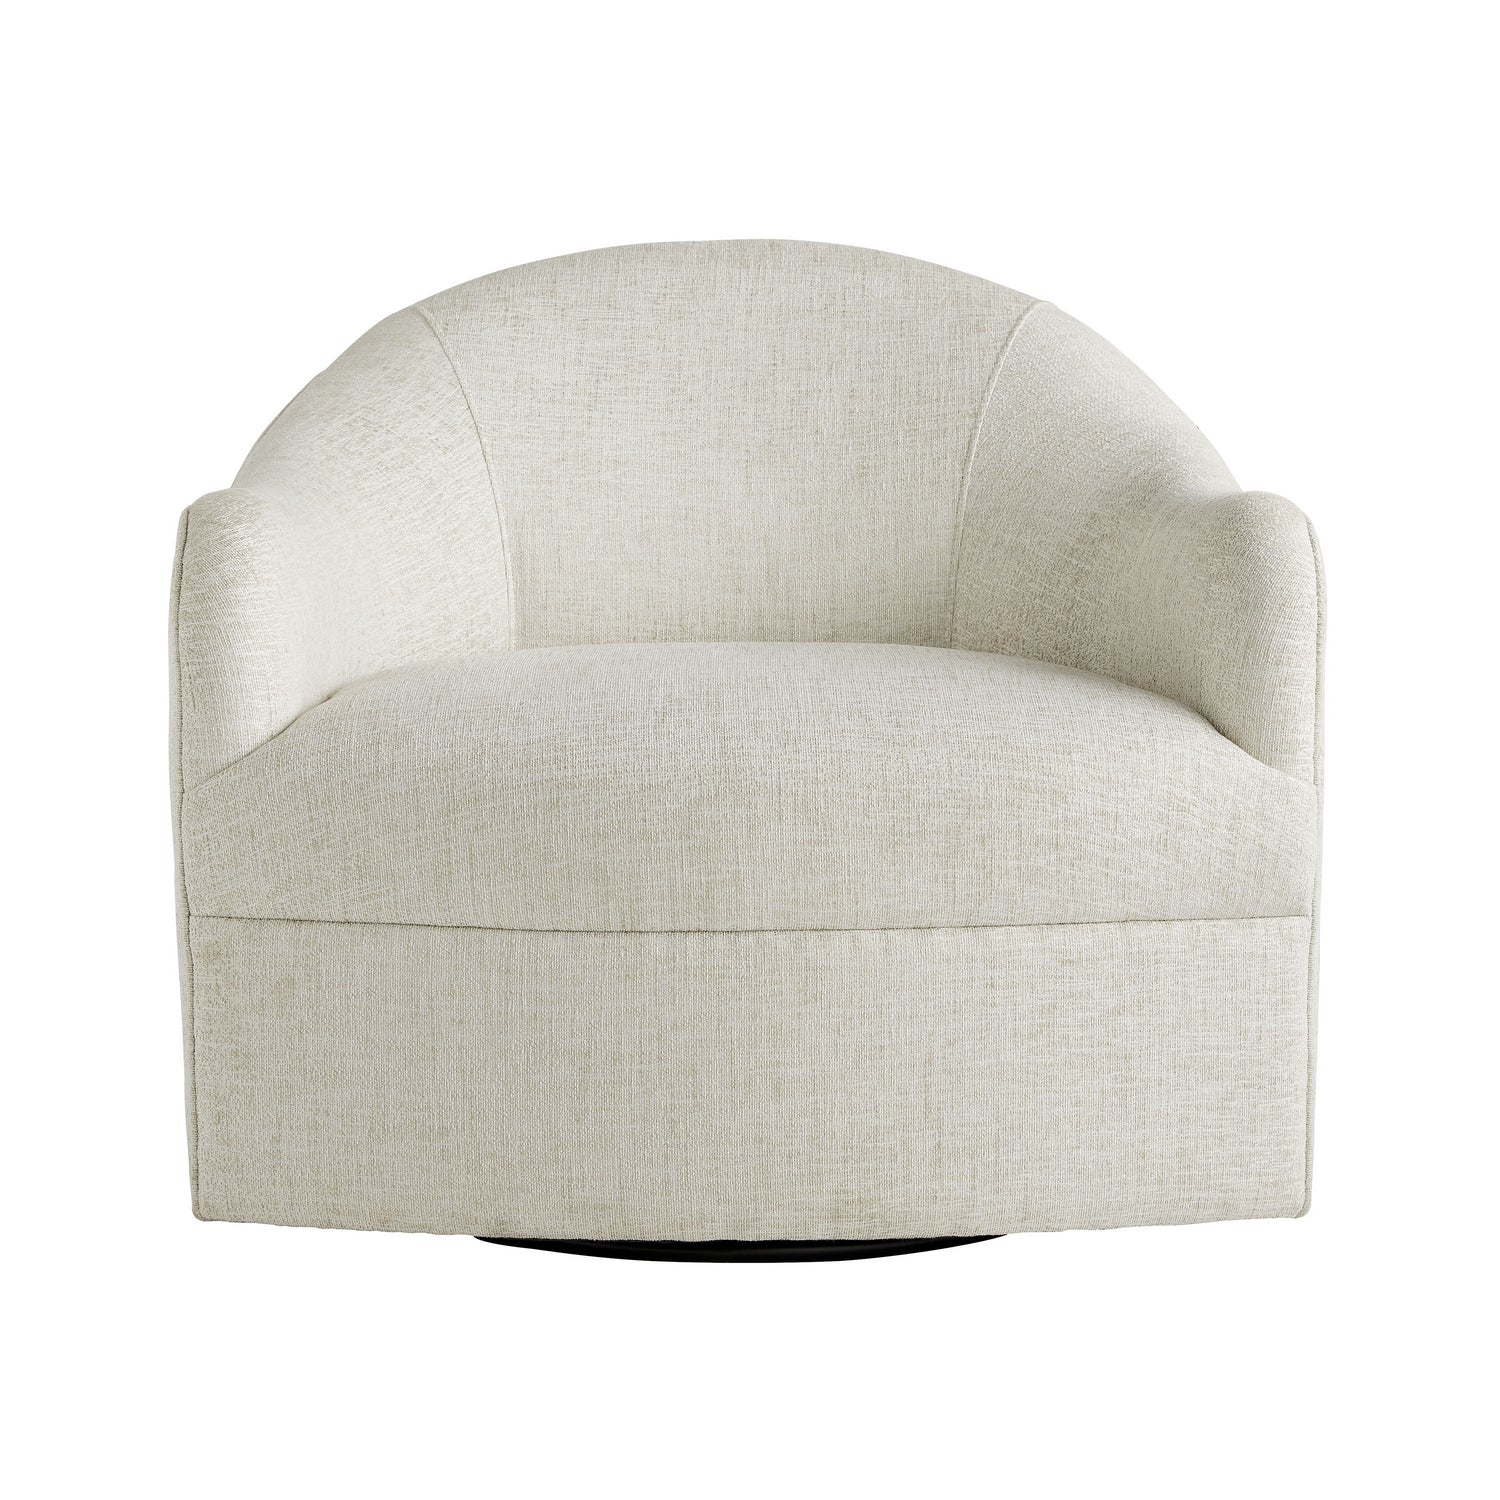 Lounge Chair from the Delfino collection in Frost finish